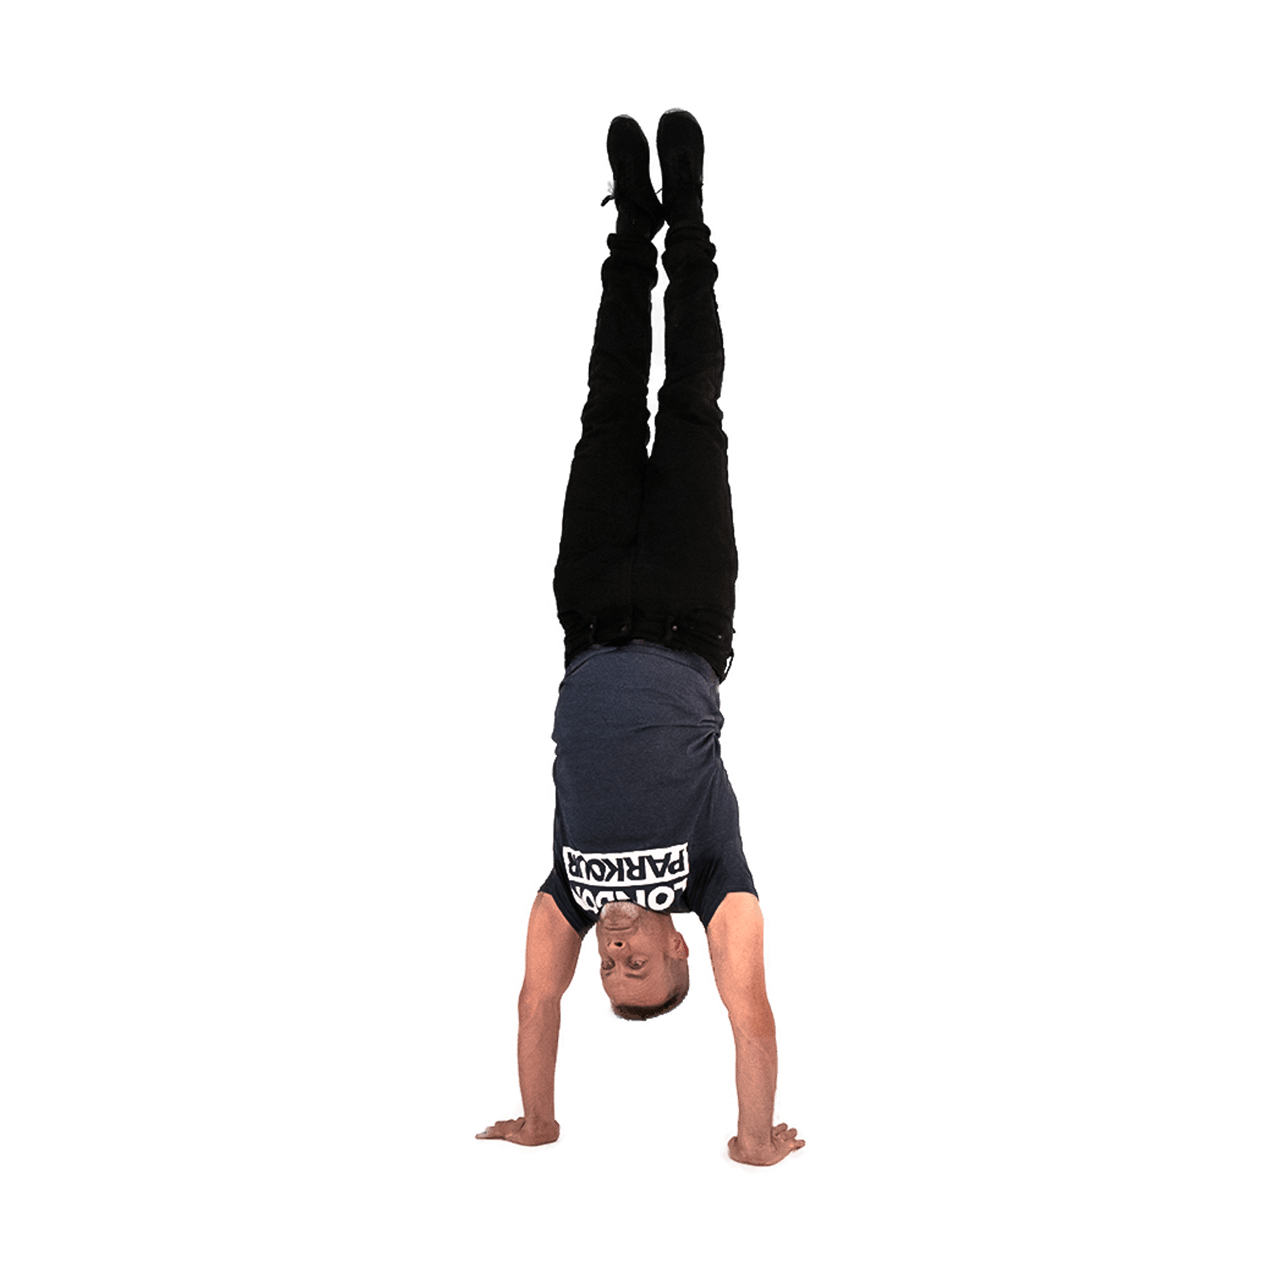 Andy does a handstand.